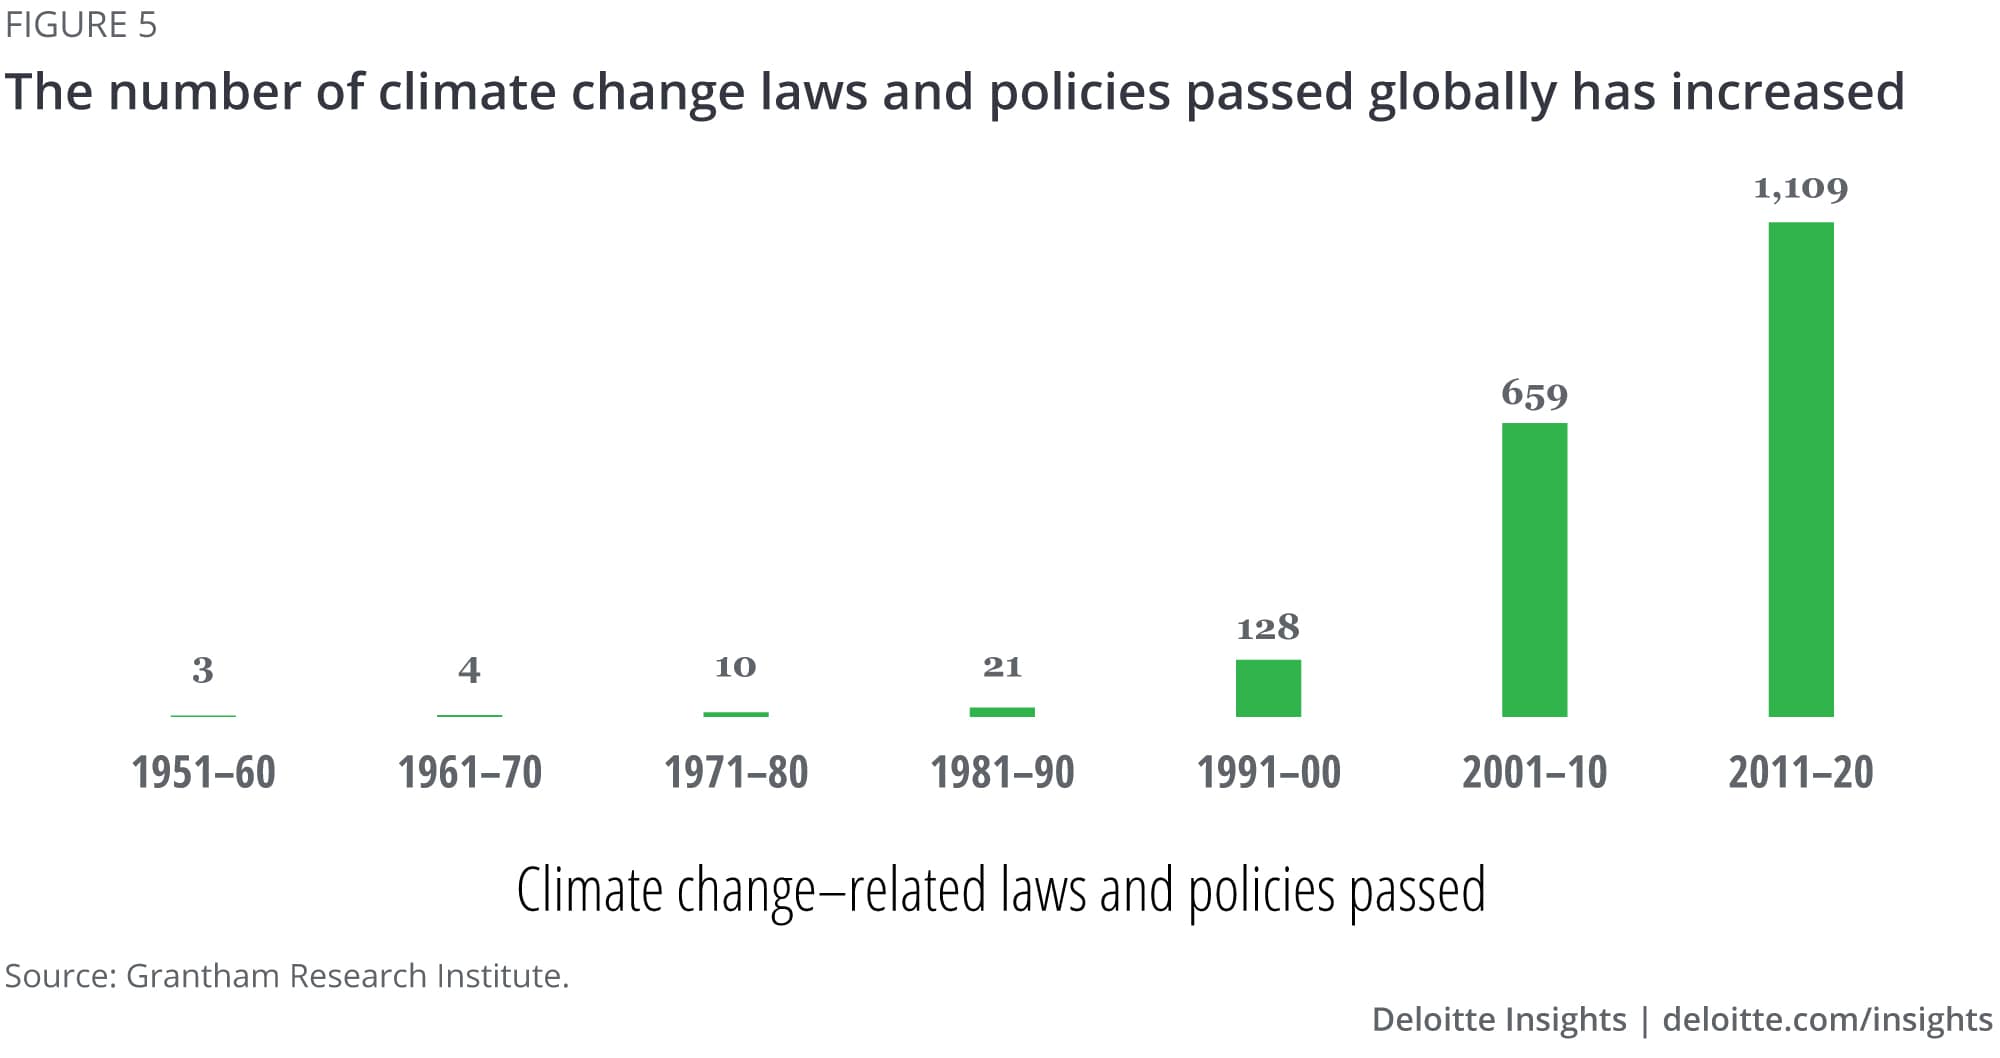 The number of climate change laws and policies passed globally has increased